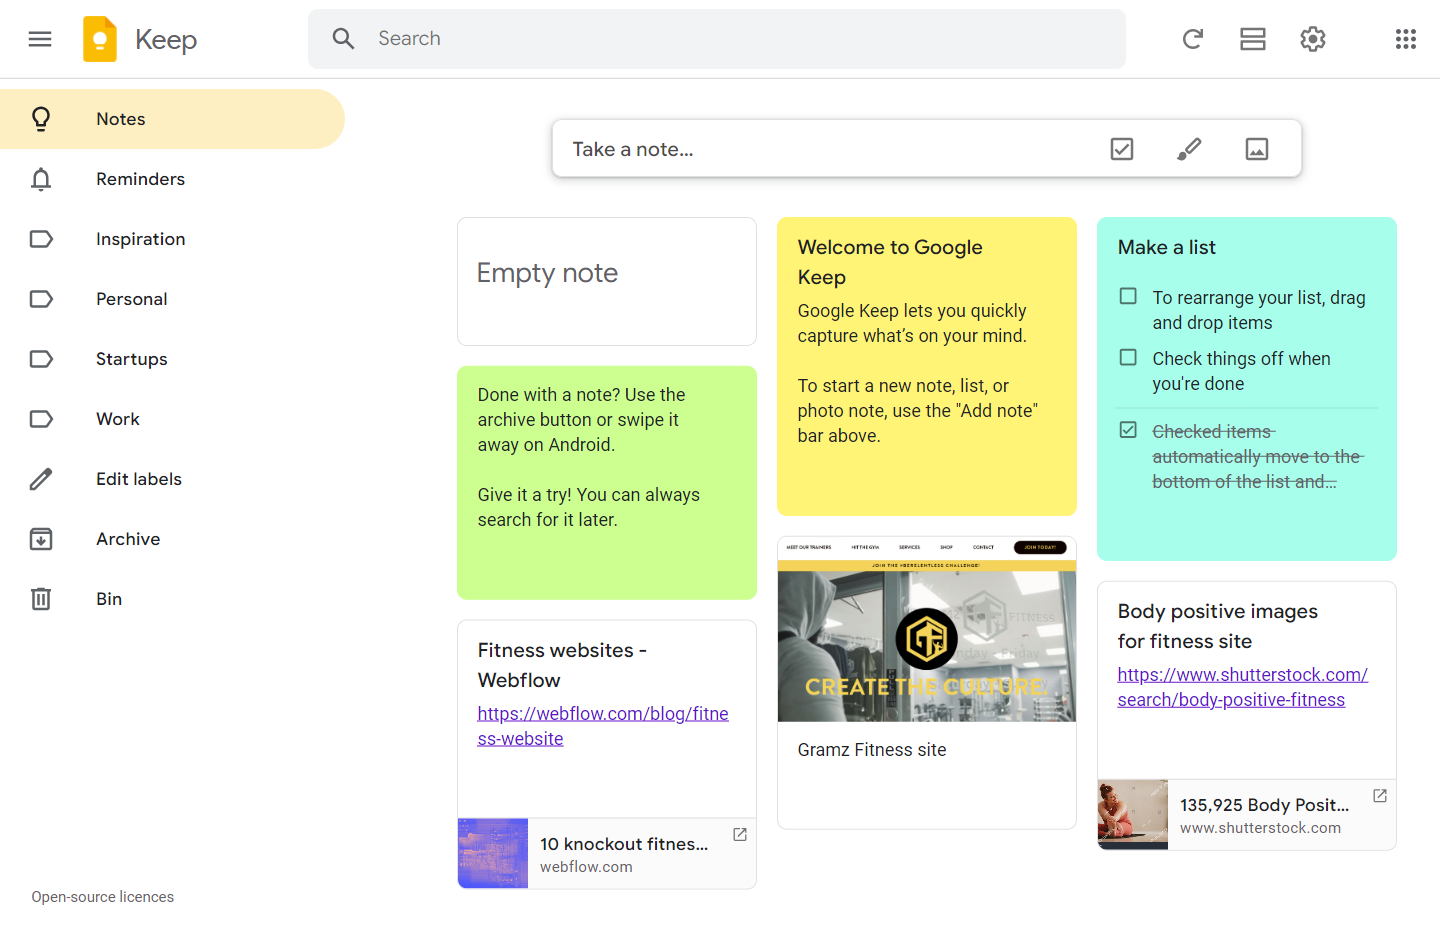 Google Keep screen with fitness website design notes.